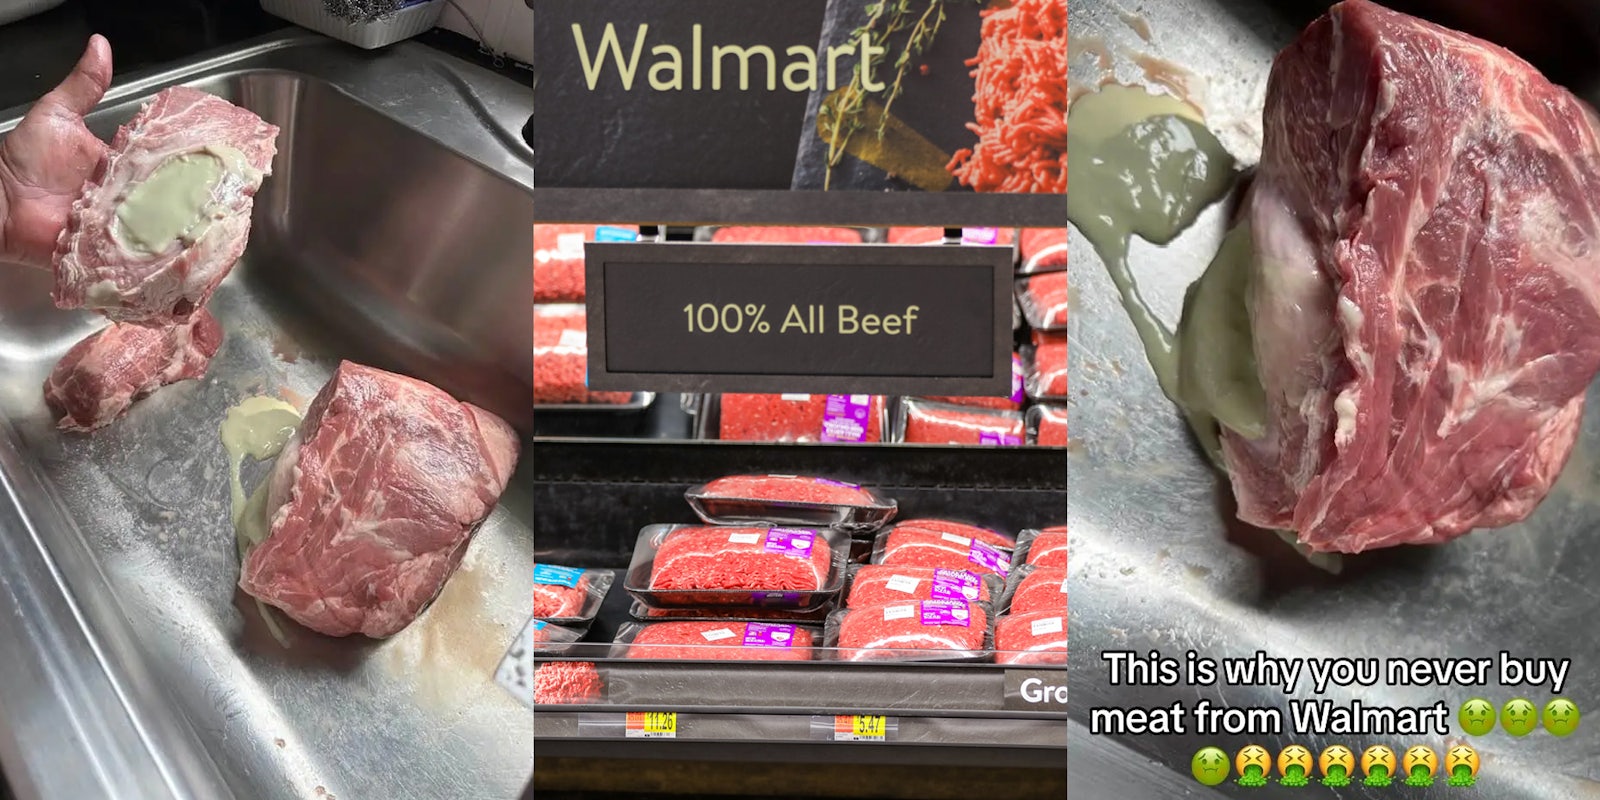 Walmart meat with light green substance coming out (l) Walmart meat section (c) Walmart meat with light green substance coming out with caption 'This is why you never buy meat from Walmart' (r)